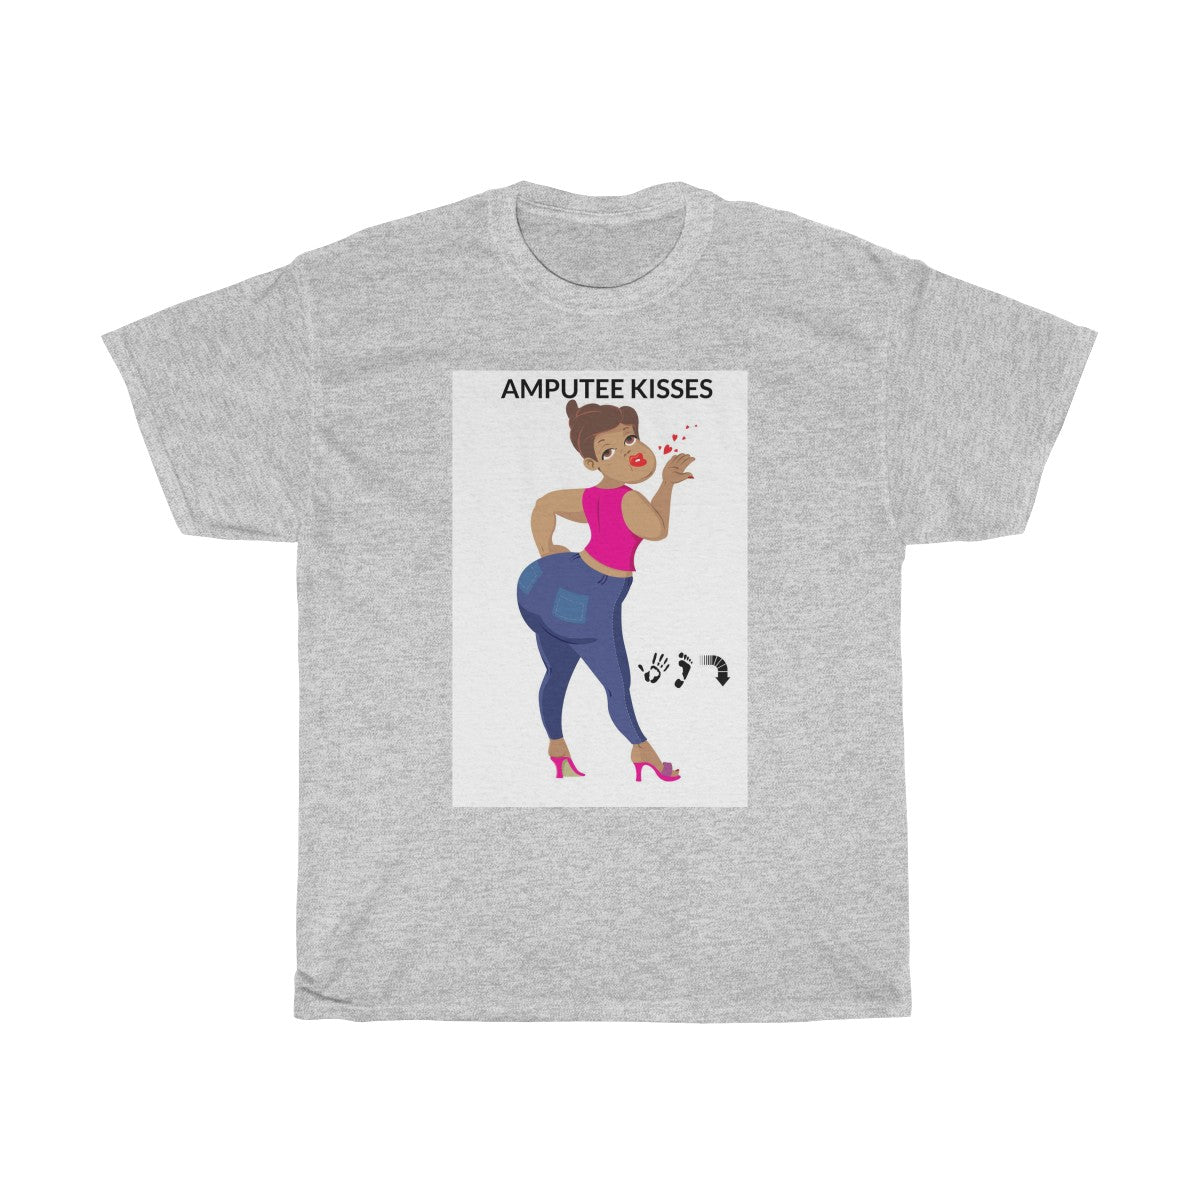 Five Toes Down Amp Kisses Unisex Tee